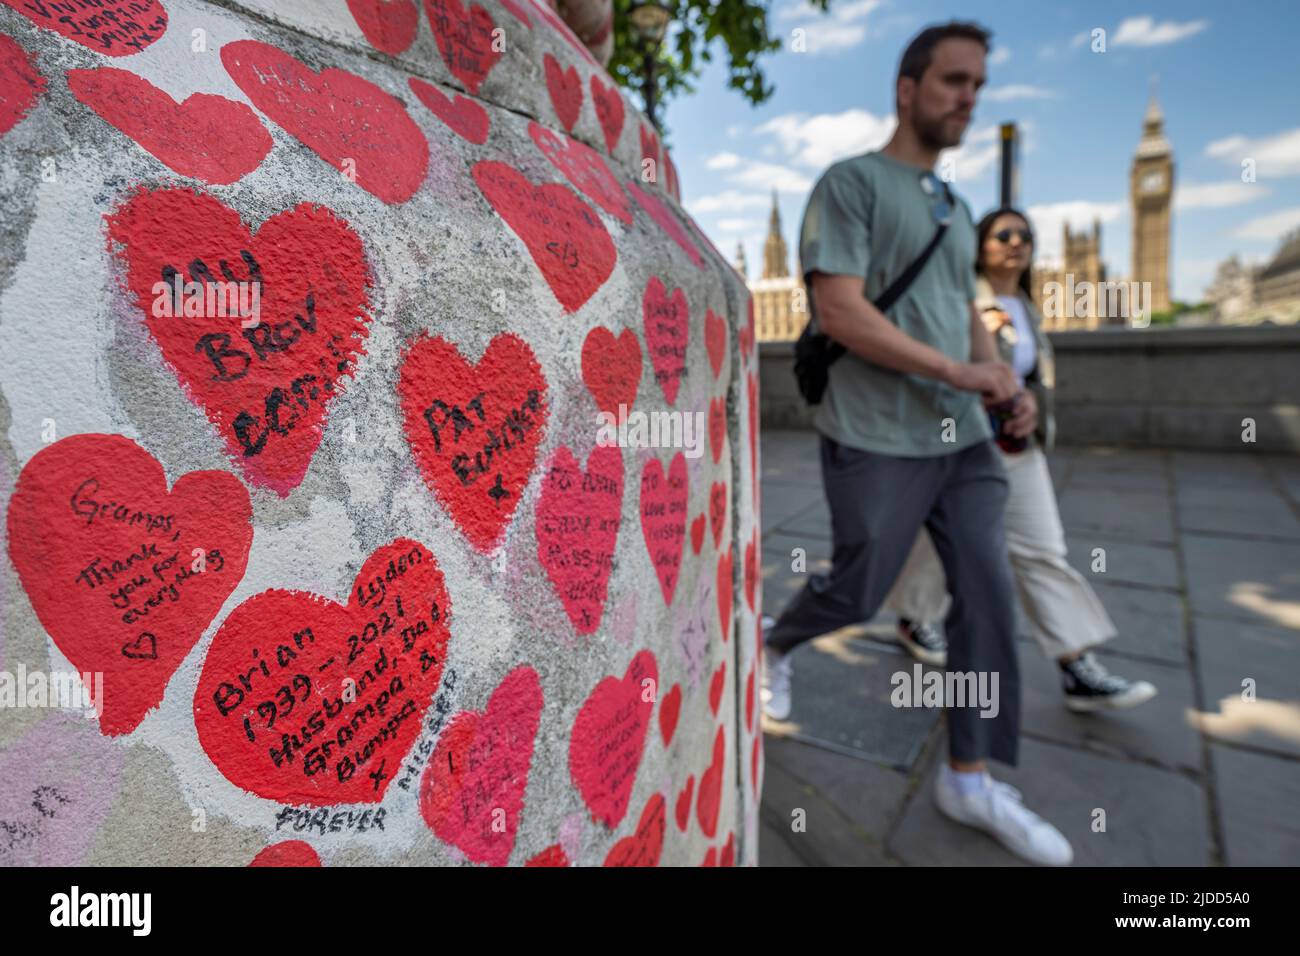 London, UK.  20 June 2022. People pass the National Covid Memorial Wall opposite the Houses of Parliament.  Current data from the ZOE Covid study app shows that daily symptomatic infections rose from 114,030 on 1 June to 188,369 on 17 June.  A new study by Professor Altmann at Imperial College London, shows that a previous infection provides little protection against future infections, explaining the greater-than-expected rise in cases seen in the past three weeks, driven by the BA.4 and BA.5 Omicron subvariants.  Credit: Stephen Chung / Alamy Live News Stock Photo